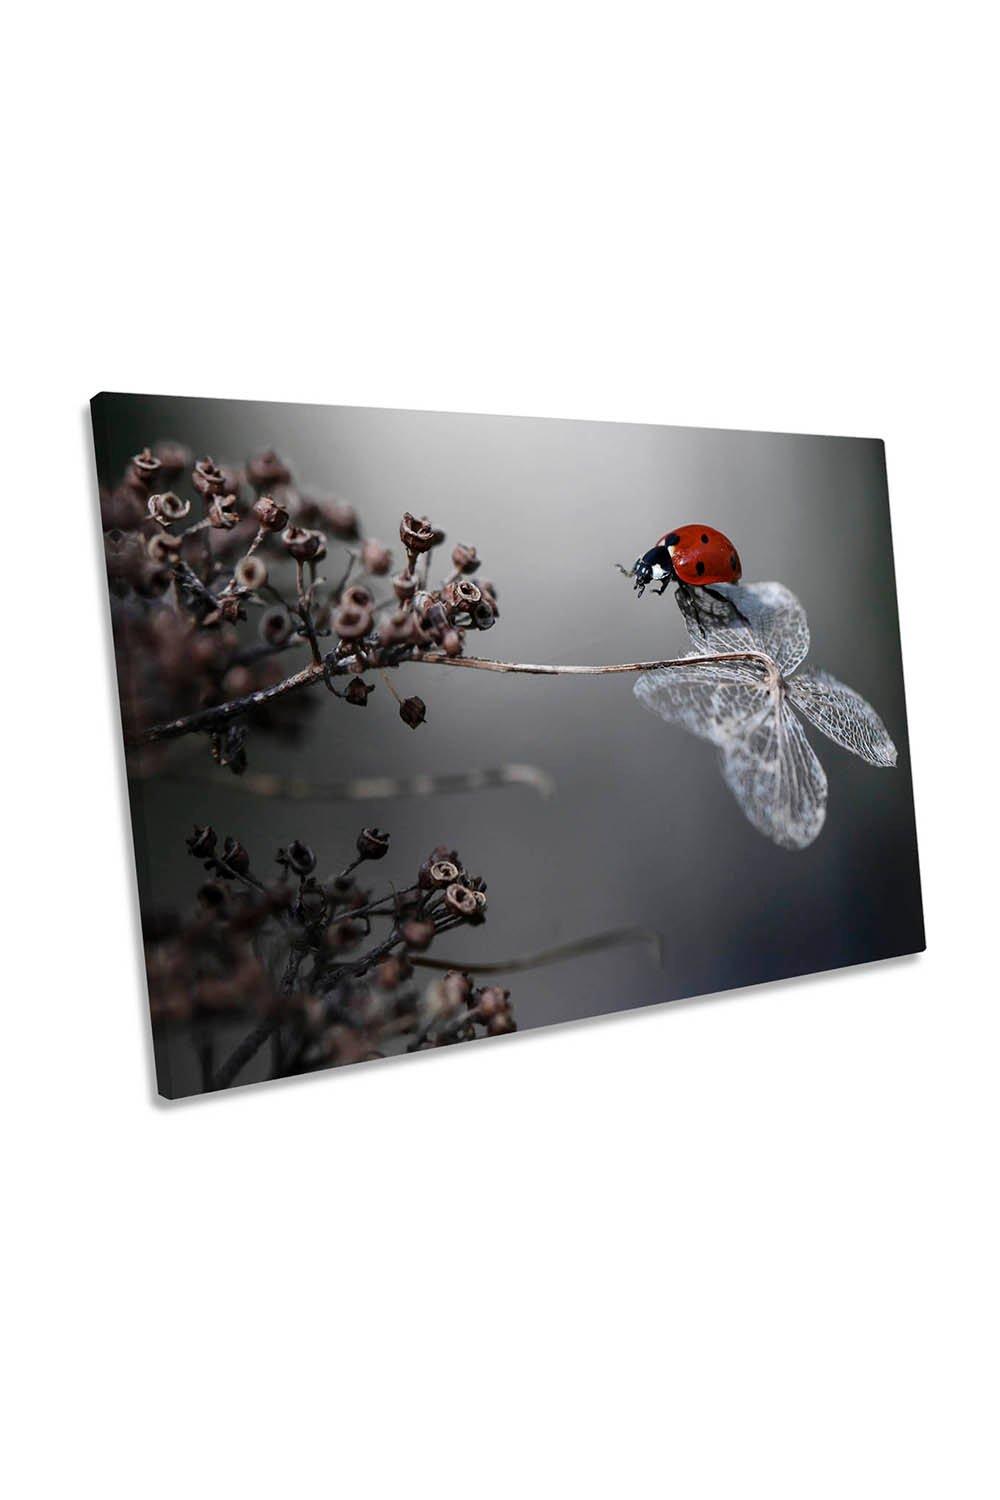 Ladybird on Hydrangea Floral Canvas Wall Art Picture Print